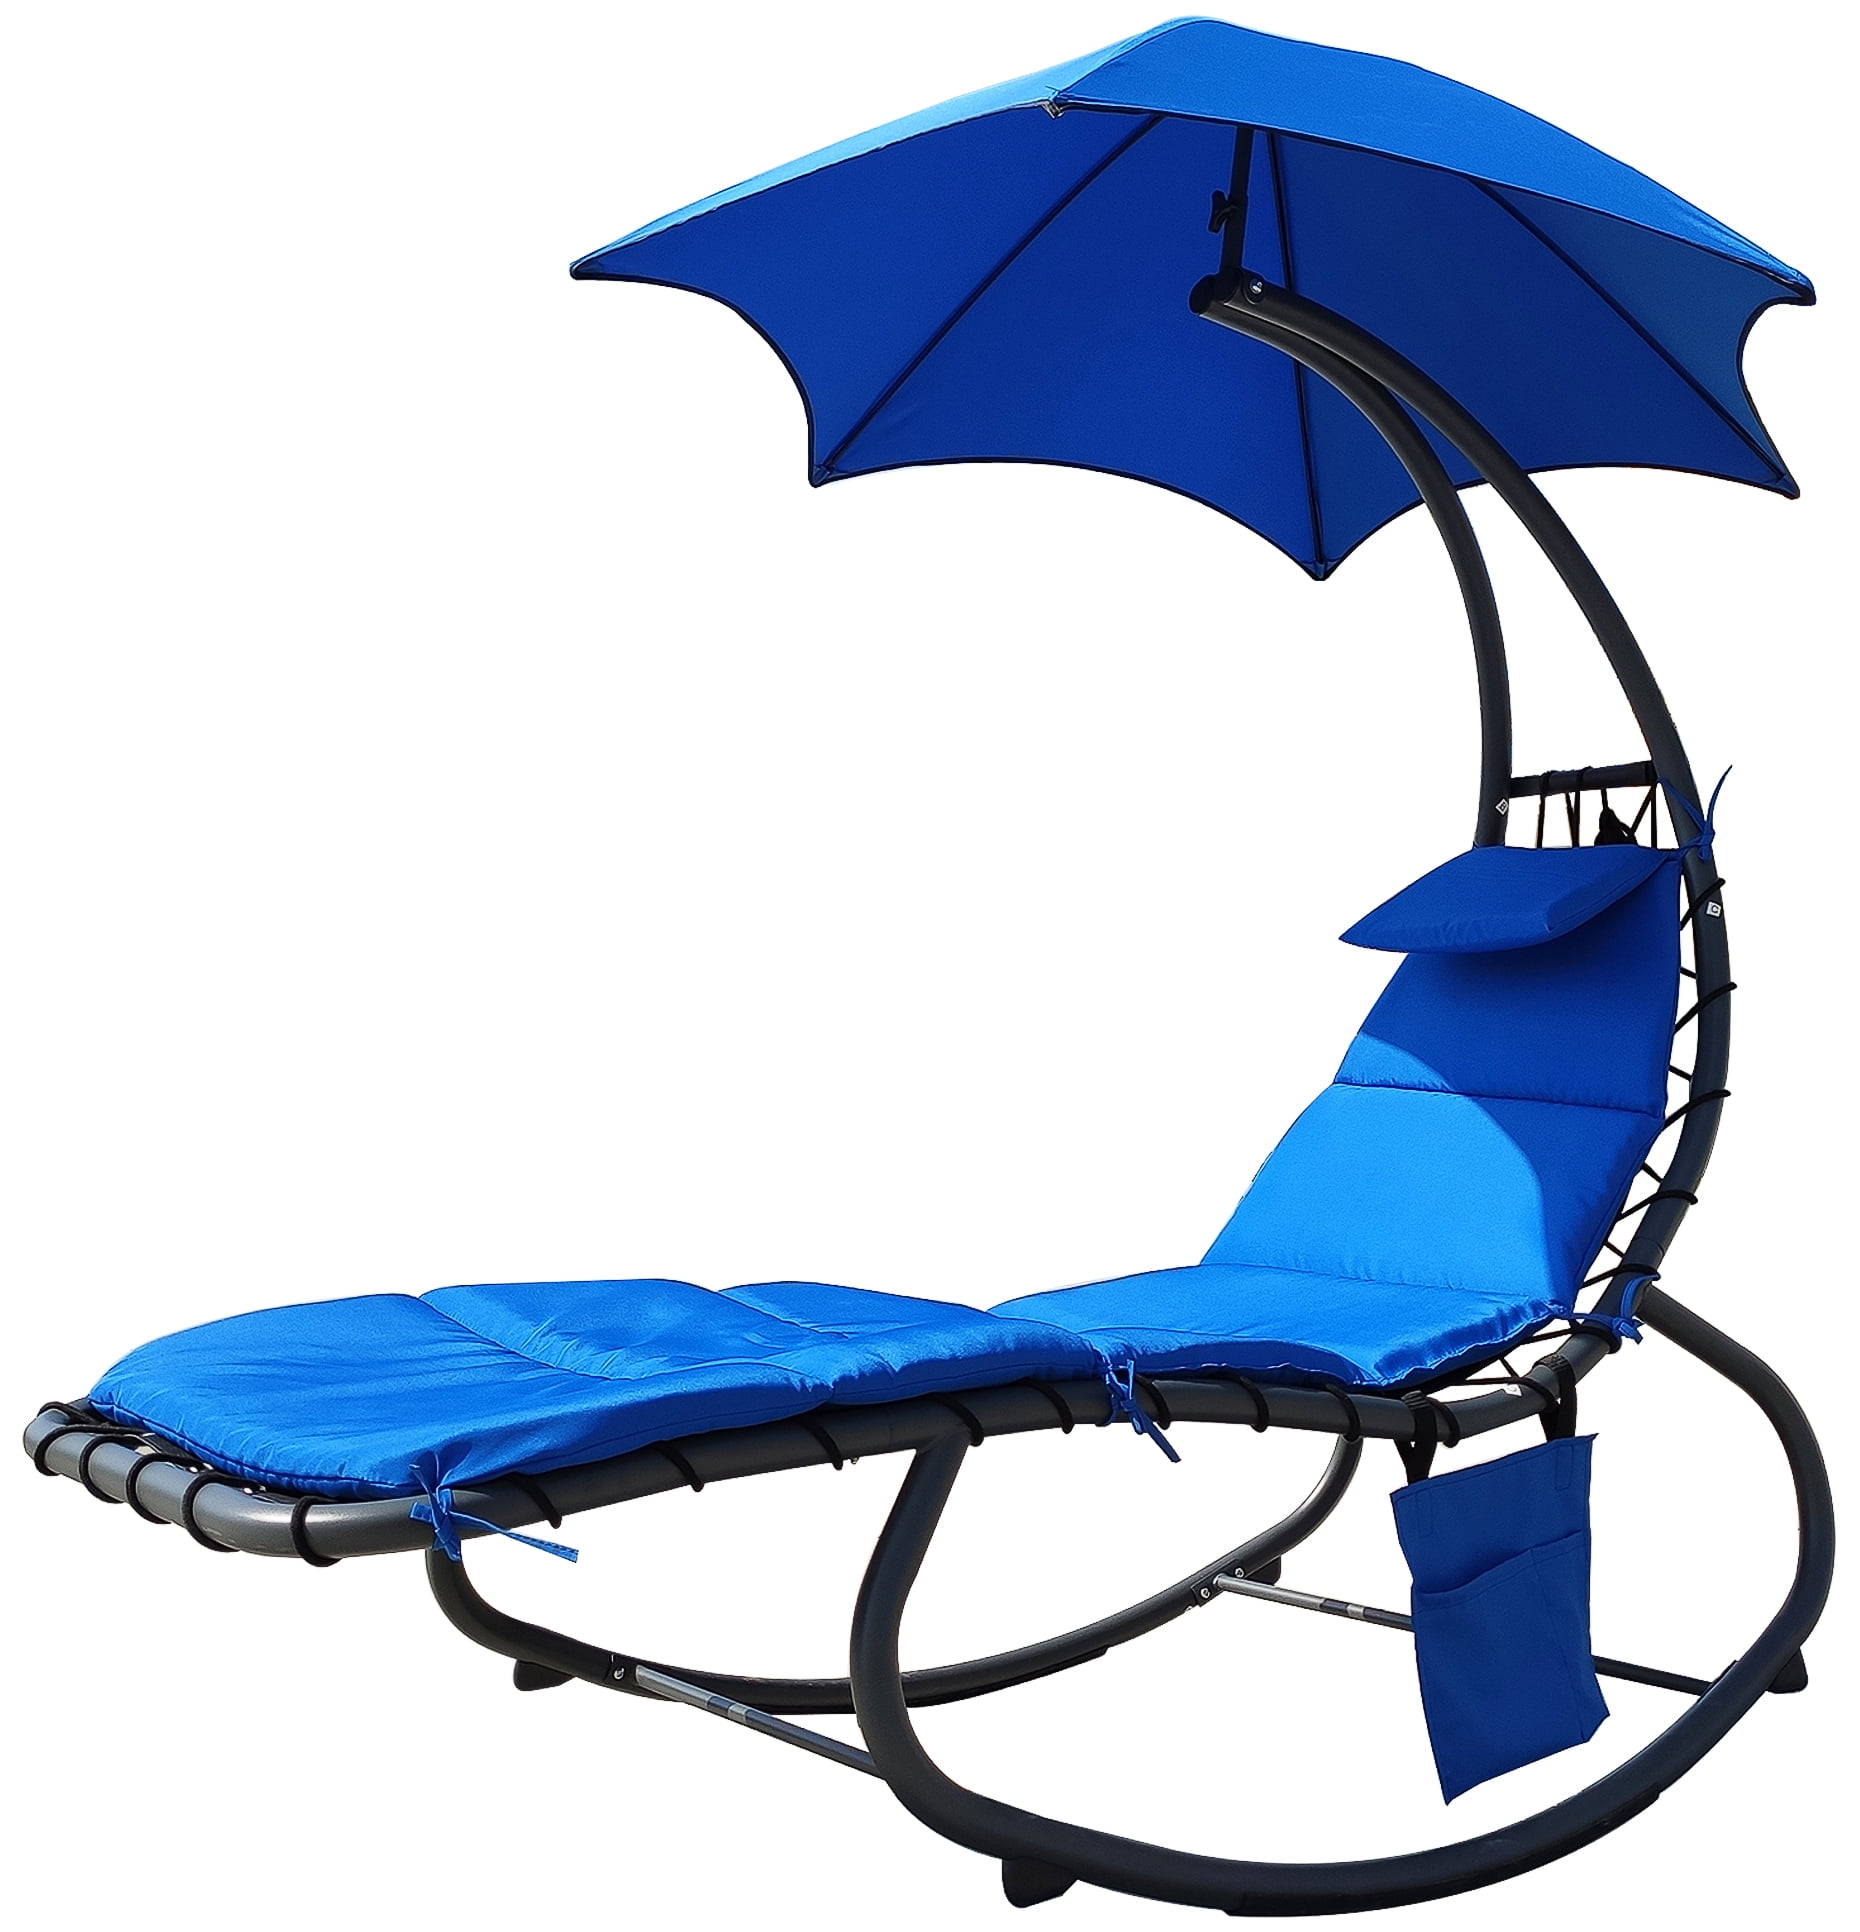 White Orange Outdoor Rocking Chaise Lounge Chair Cushion w/Canopy Shade Blue 